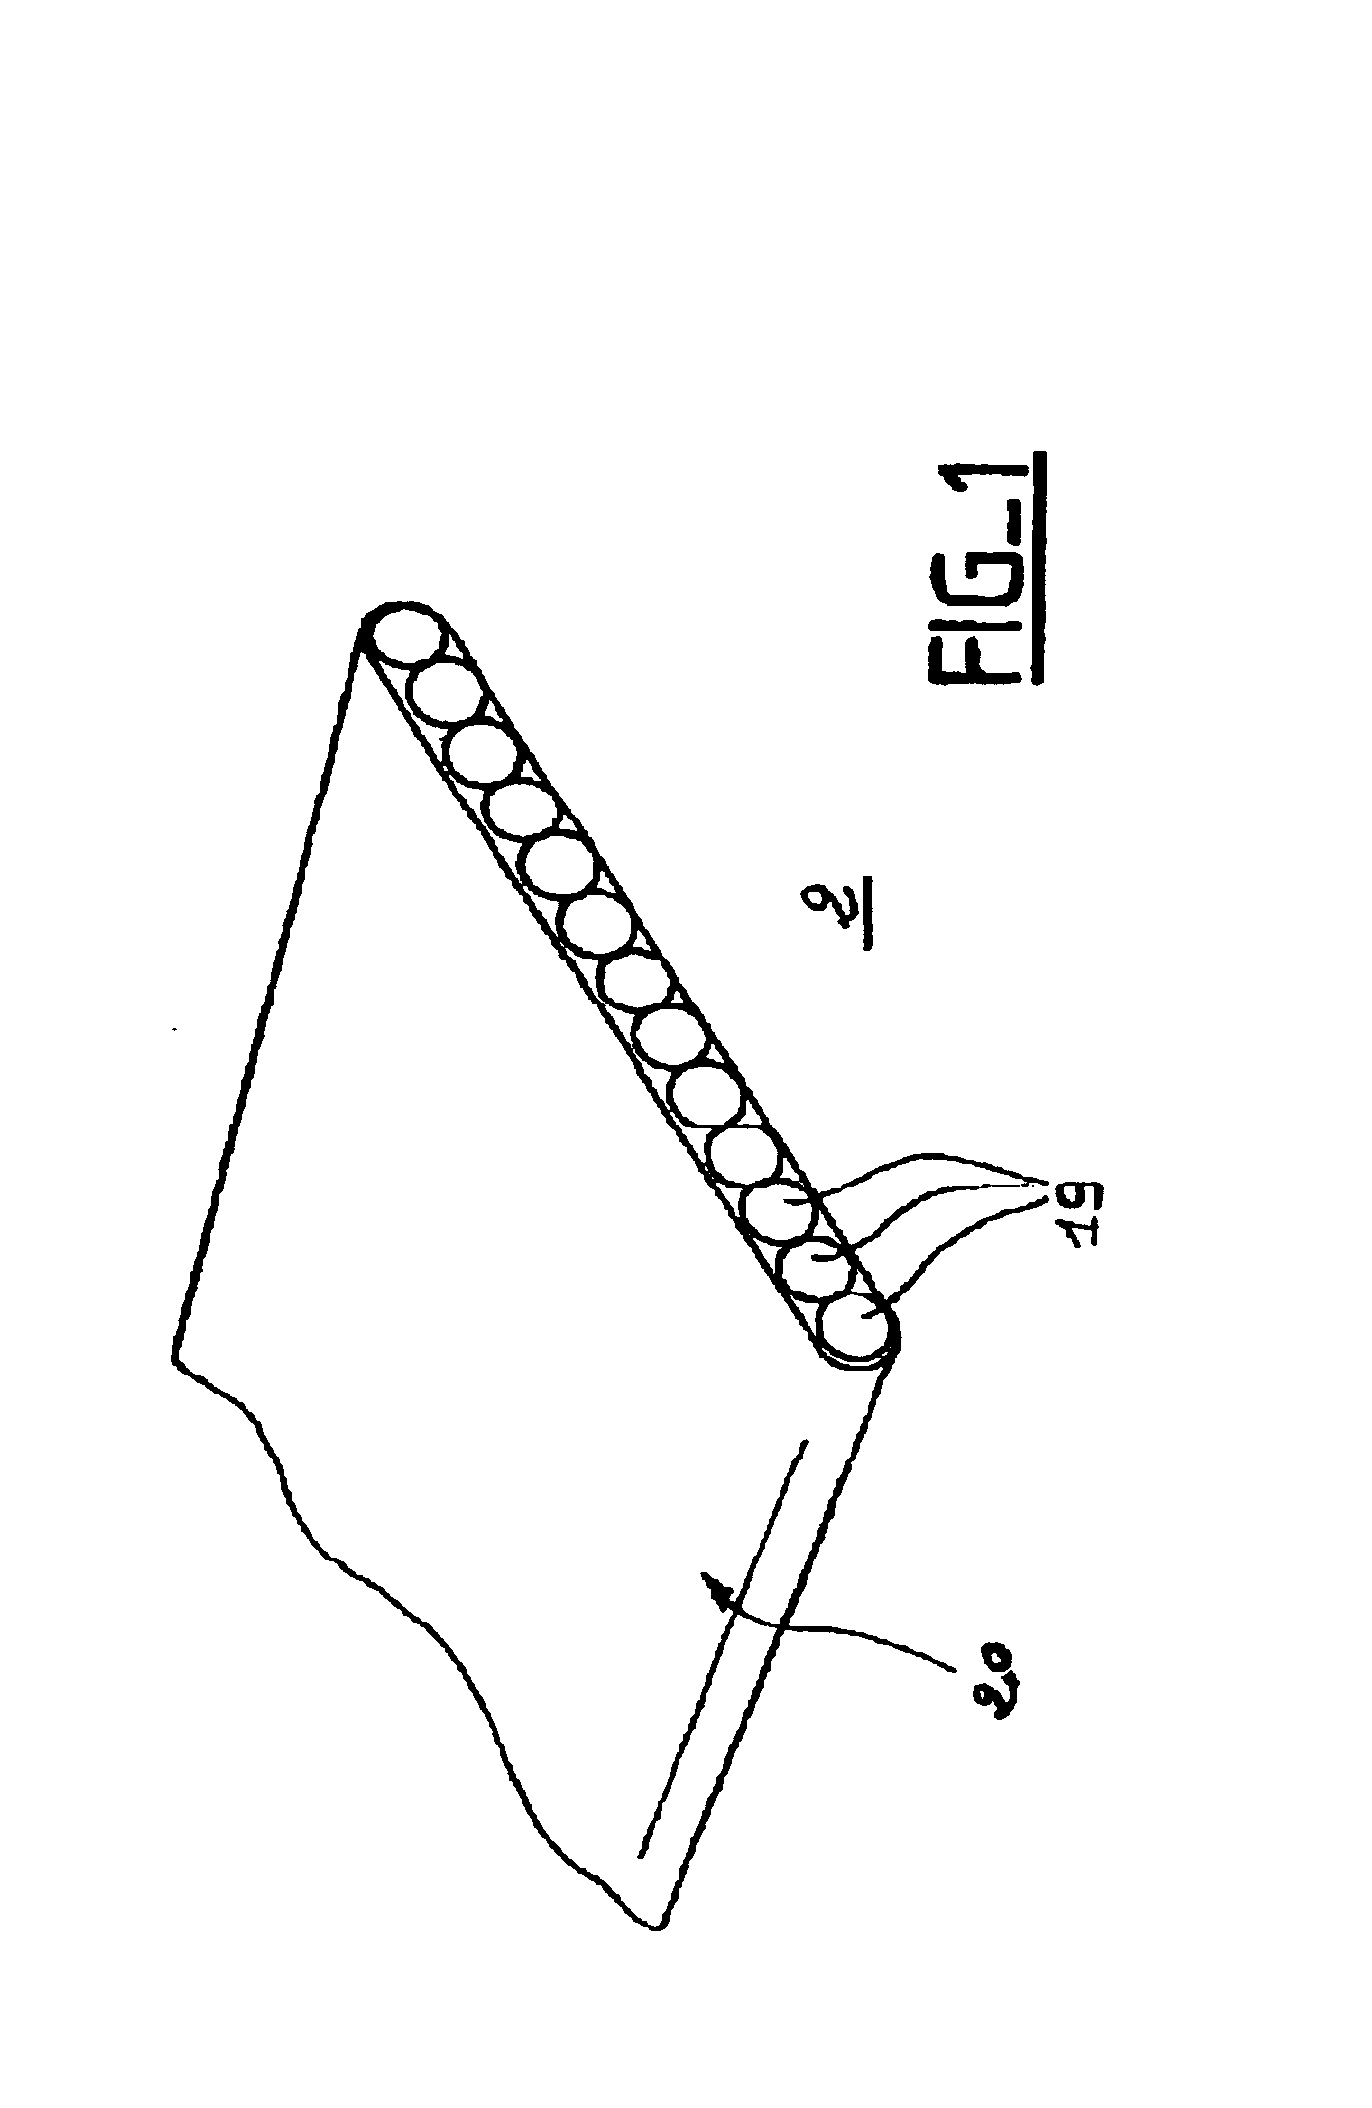 Cassette for coiling optical fibers